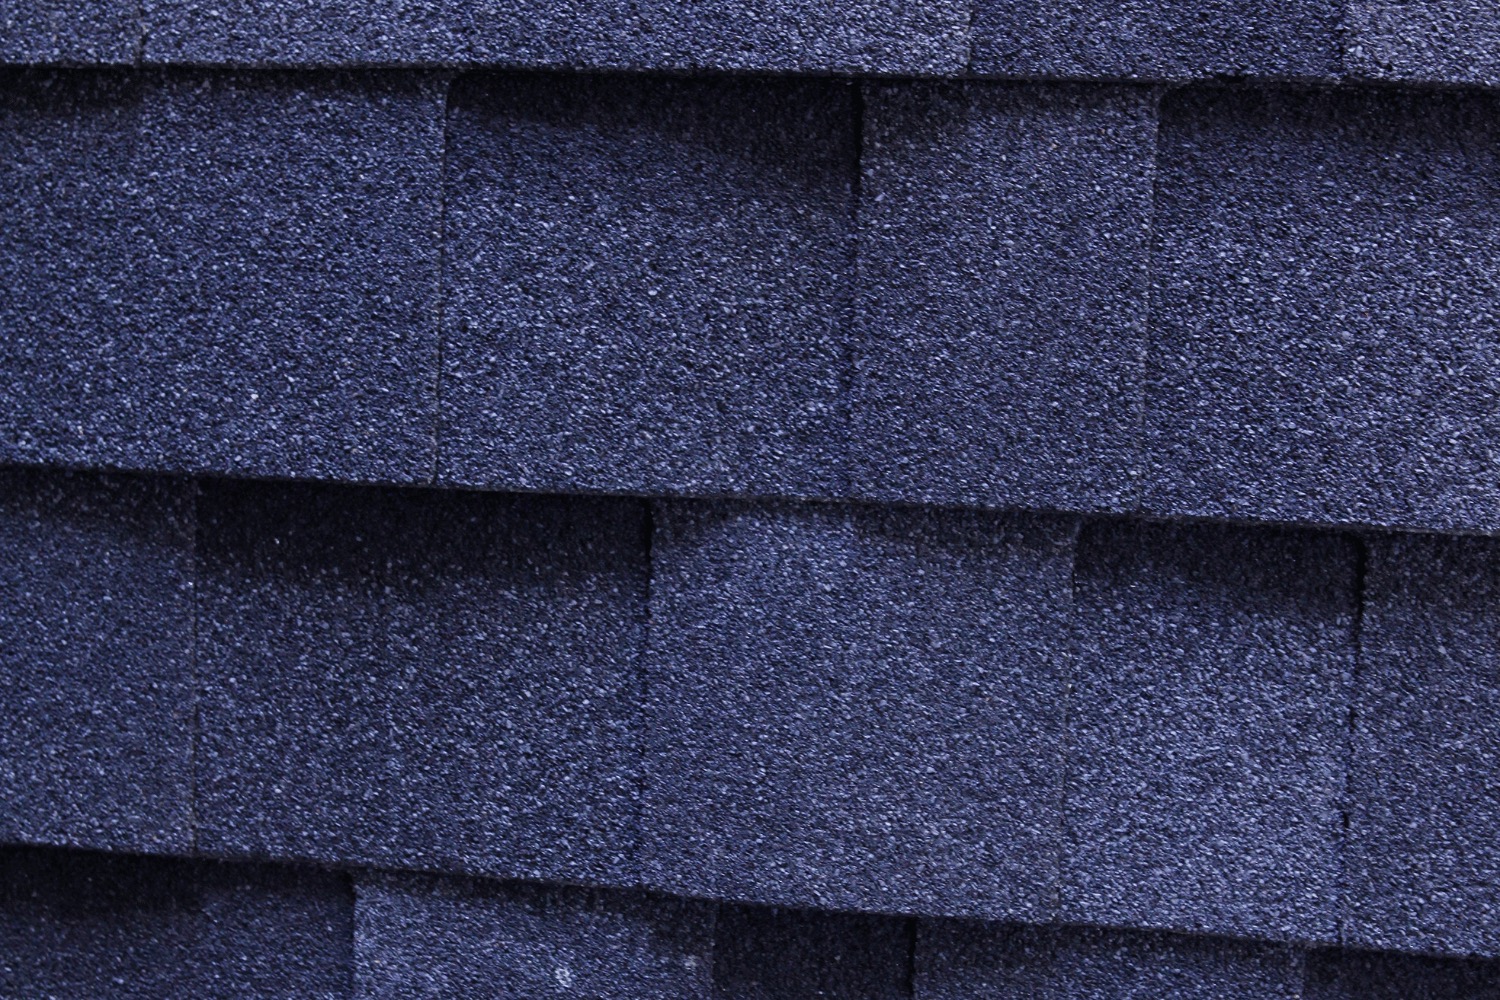 Pros and cons of architectural and luxury shingles